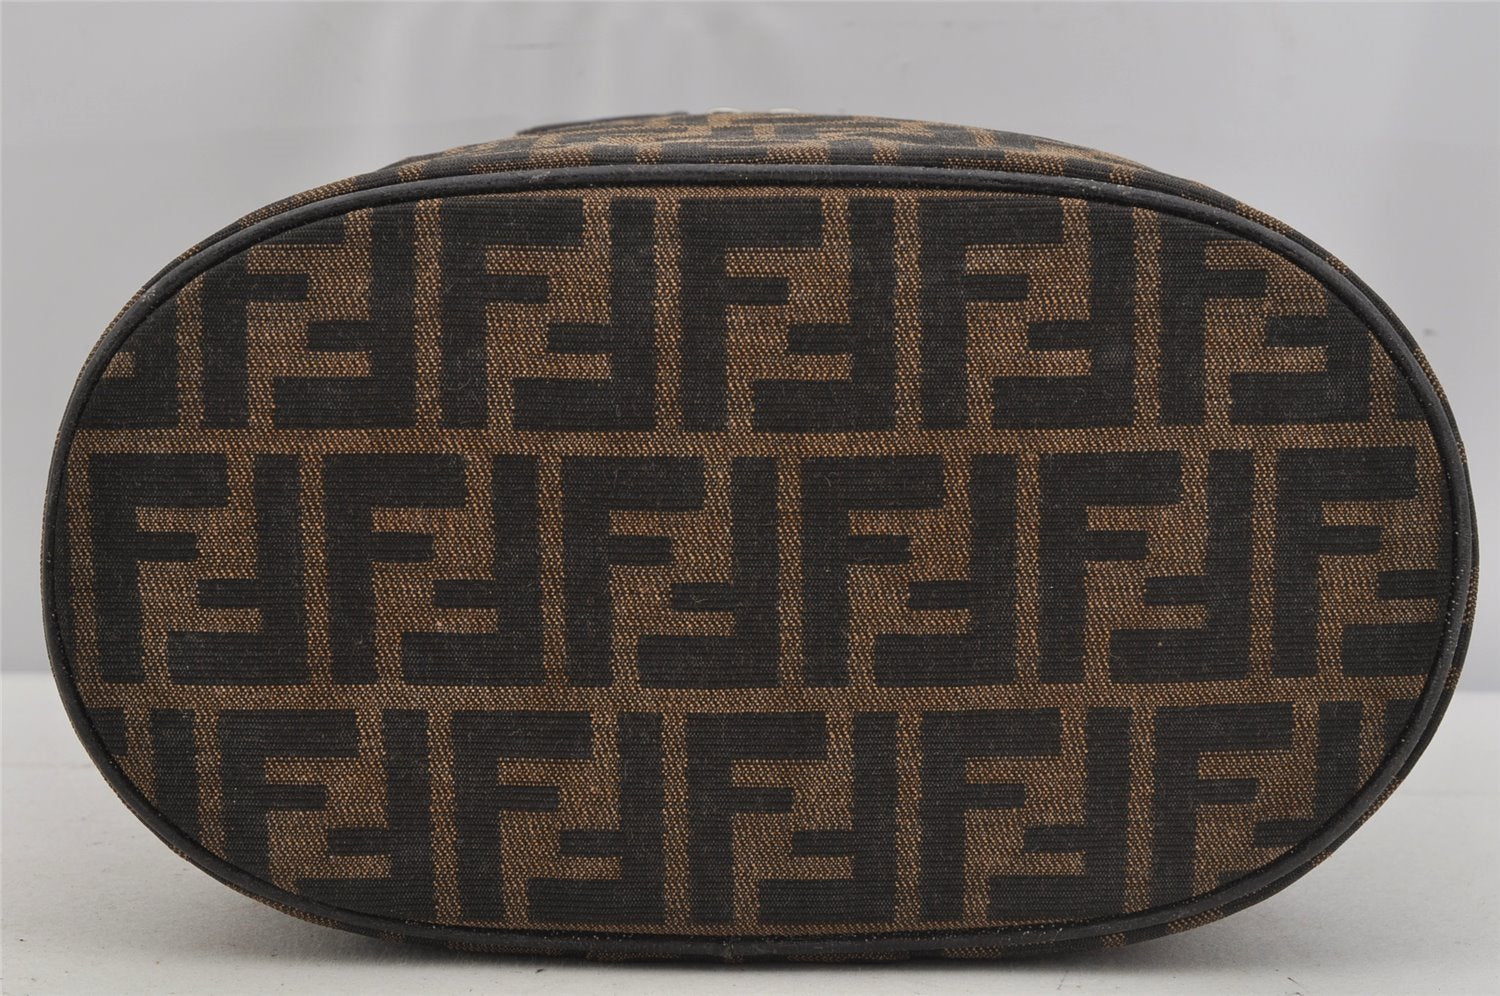 Authentic FENDI Zucca Vanity Hand Bag Pouch Canvas Leather Brown Junk 4942J